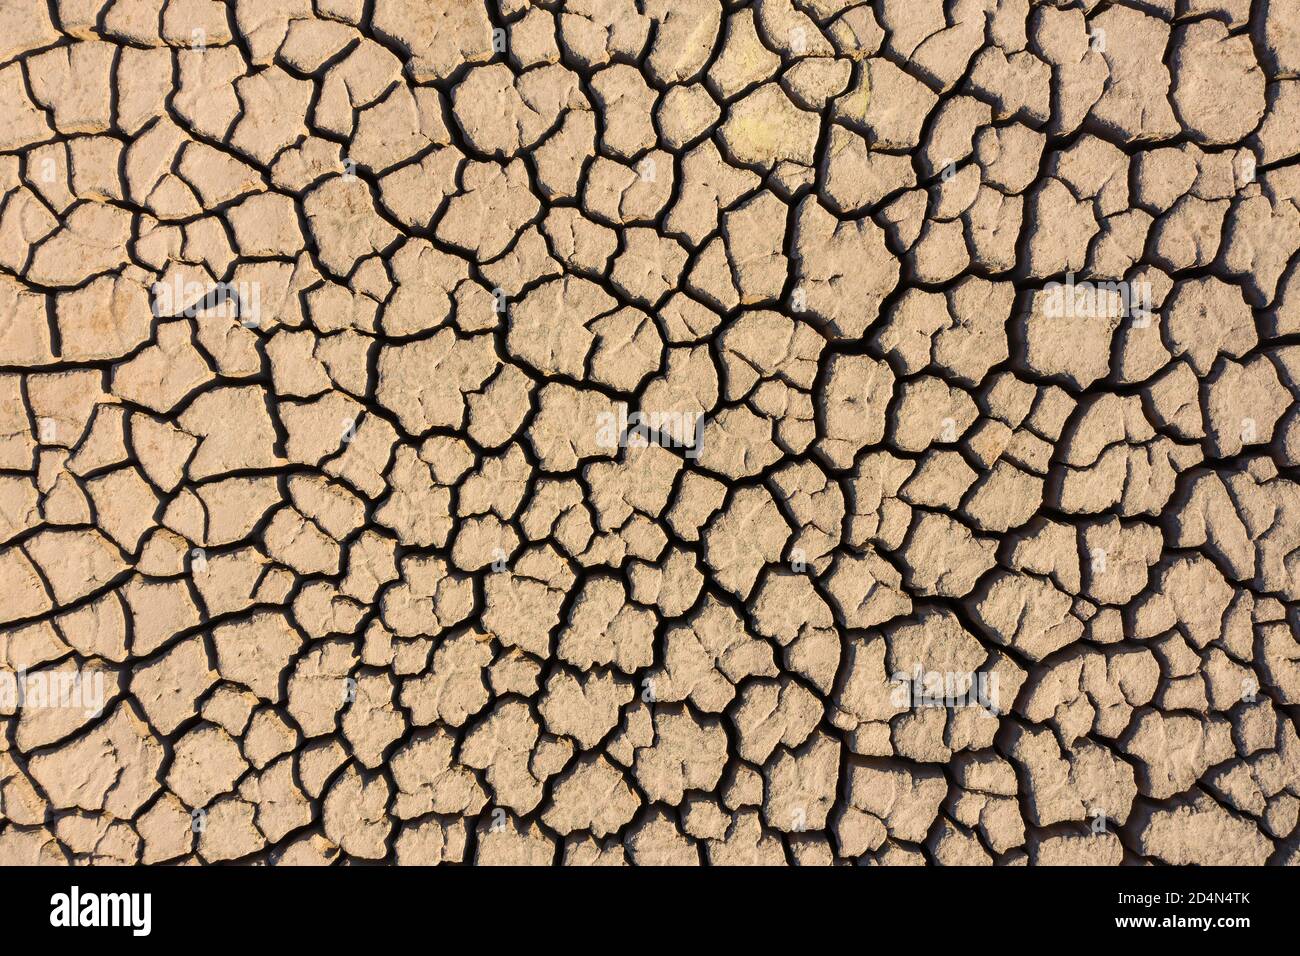 Dry lake bed with cracked Soil, Aerial view. Stock Photo